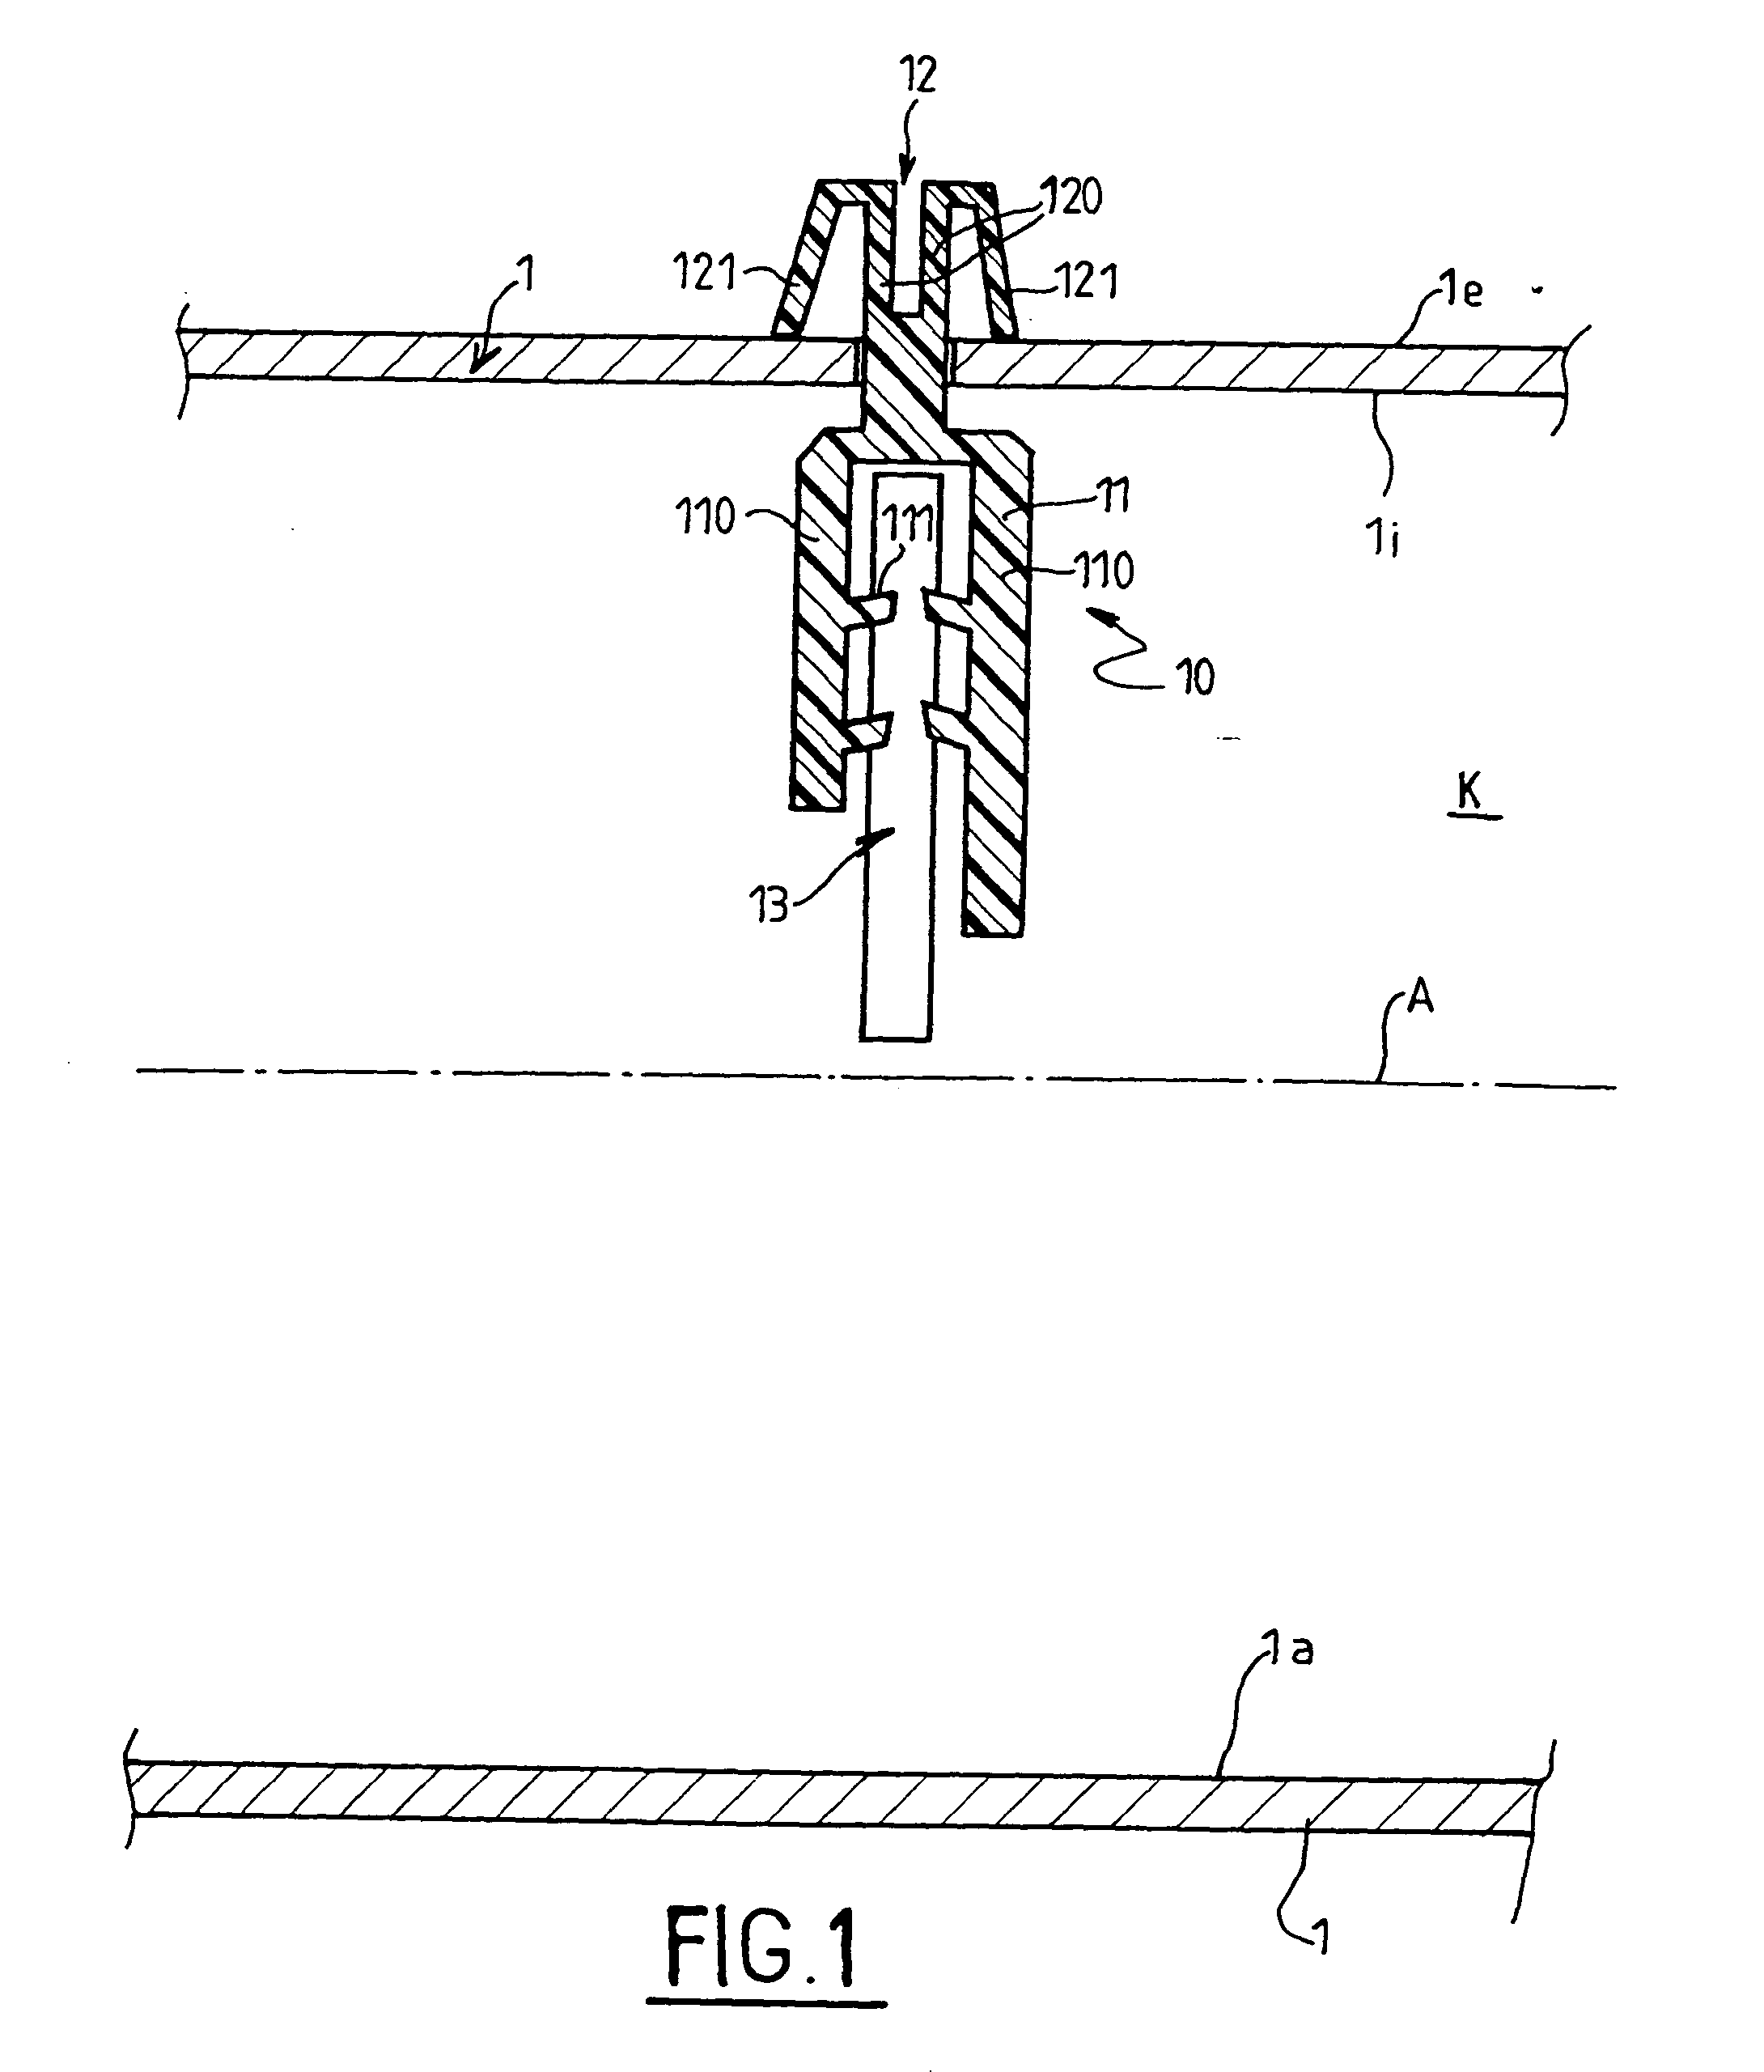 Sound insulation assembly for mounting in a tubular part, and a tubular part fitted with such assemblies, in particular a motor vehicle part